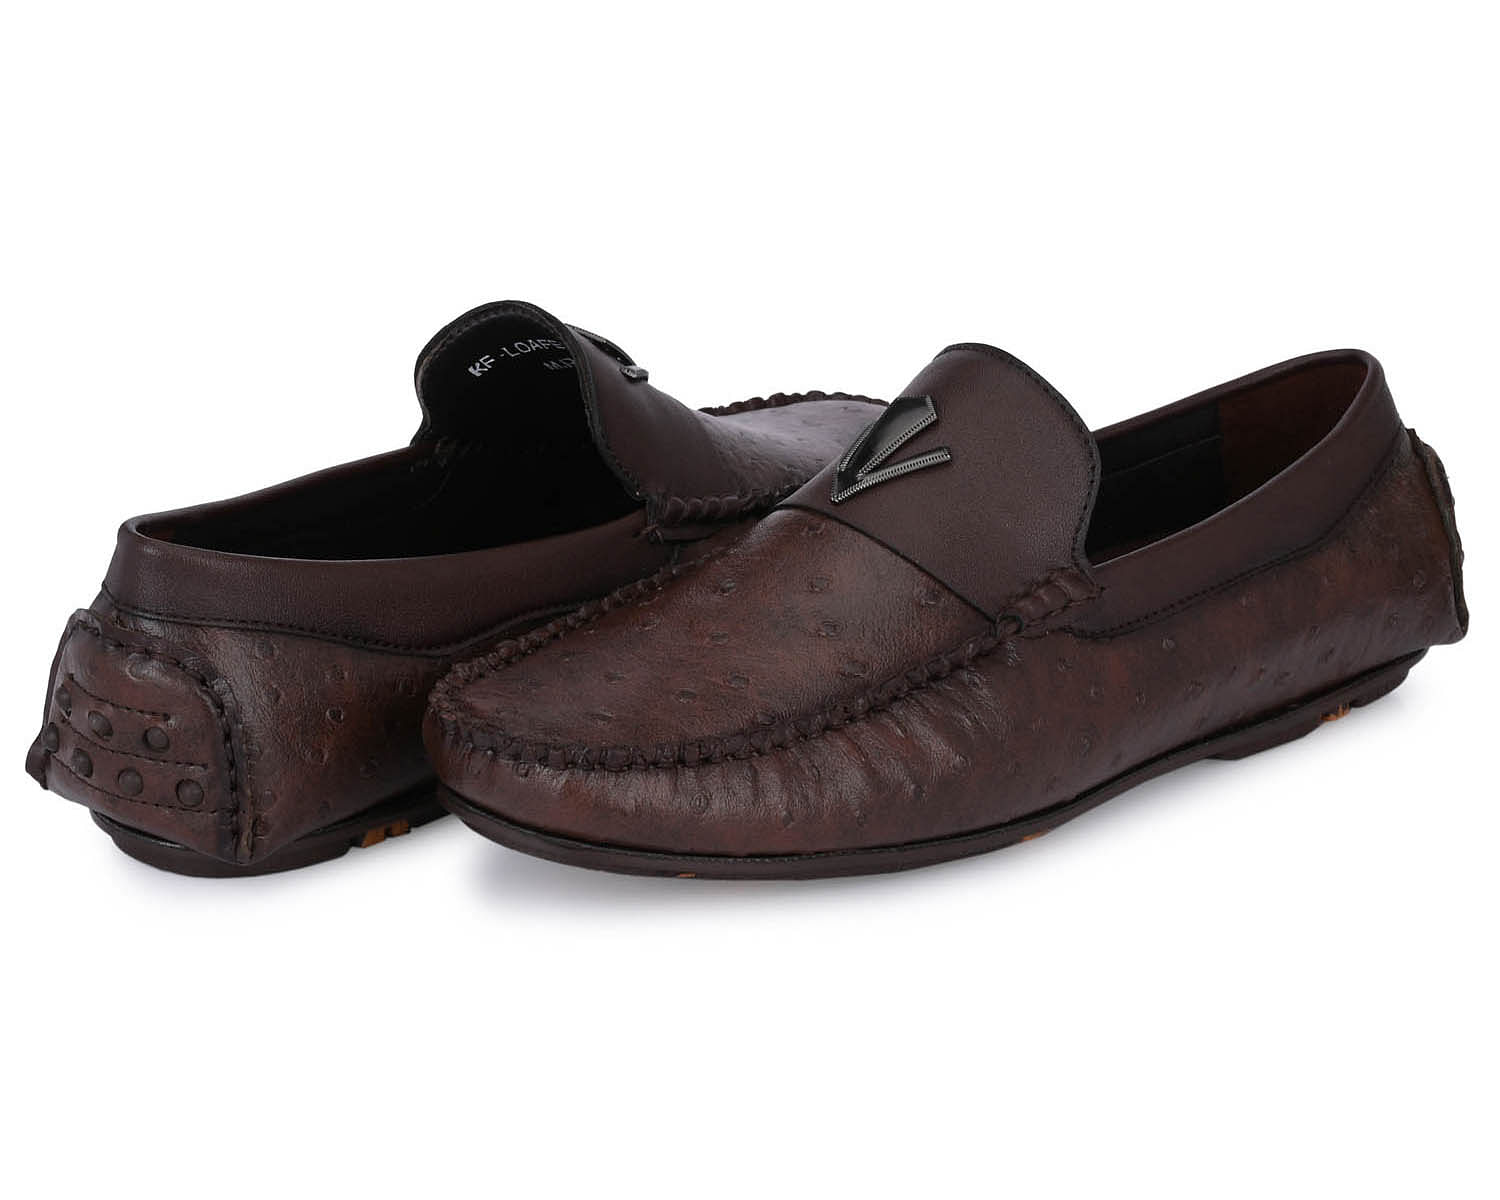 Pair-it Men's Loafers Shoes - KF-Loafer 119 - Brown